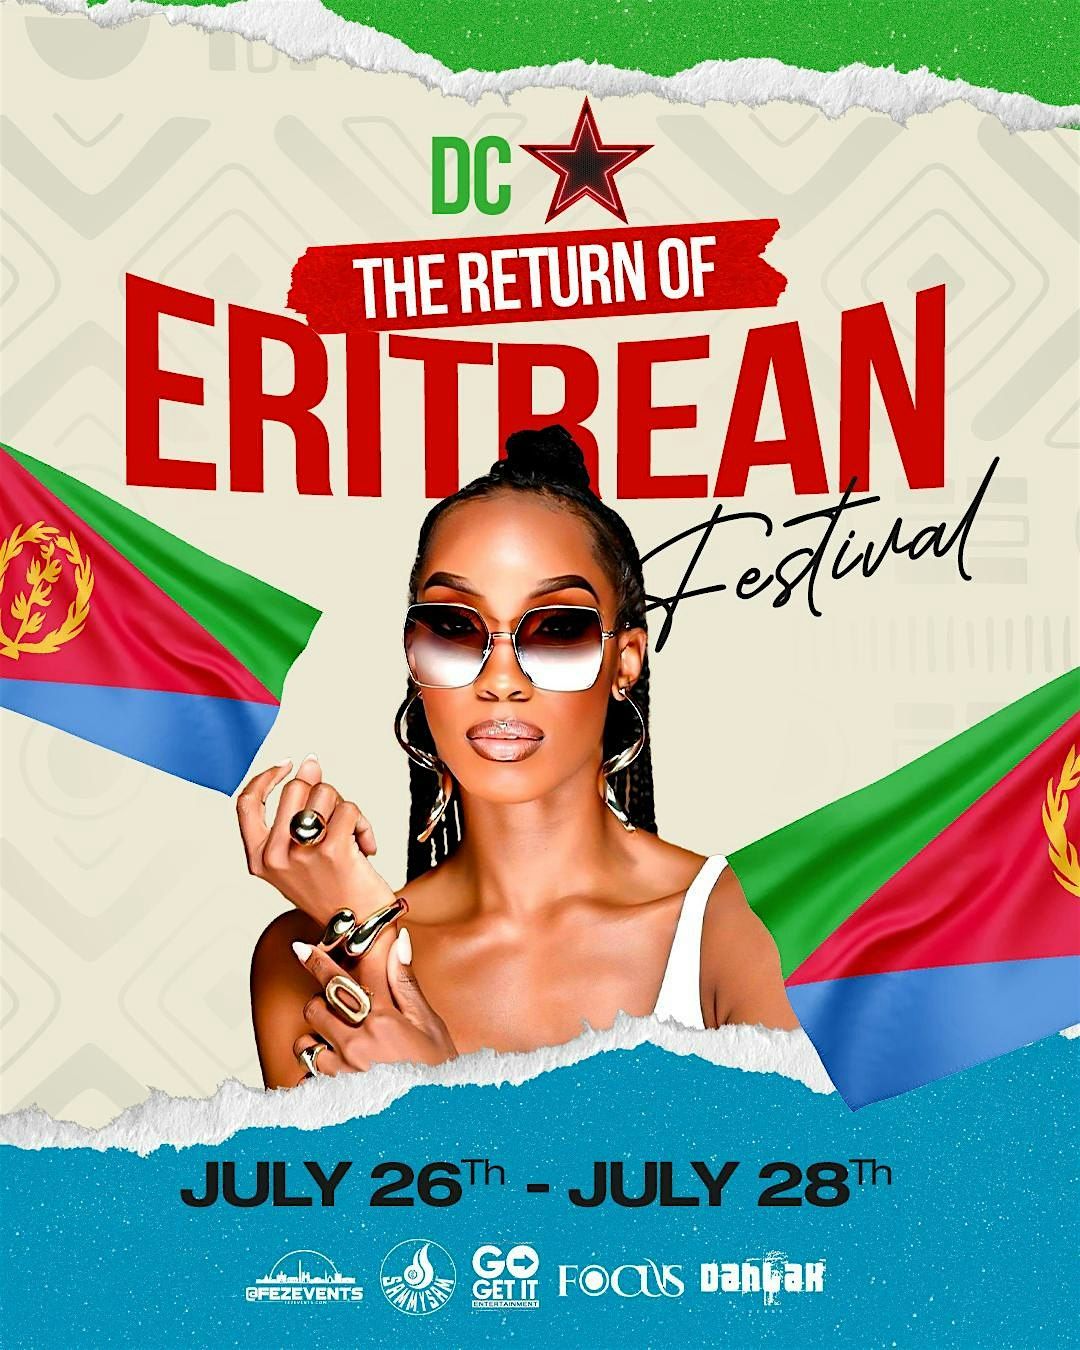 The Official Eritrean Festival in DC